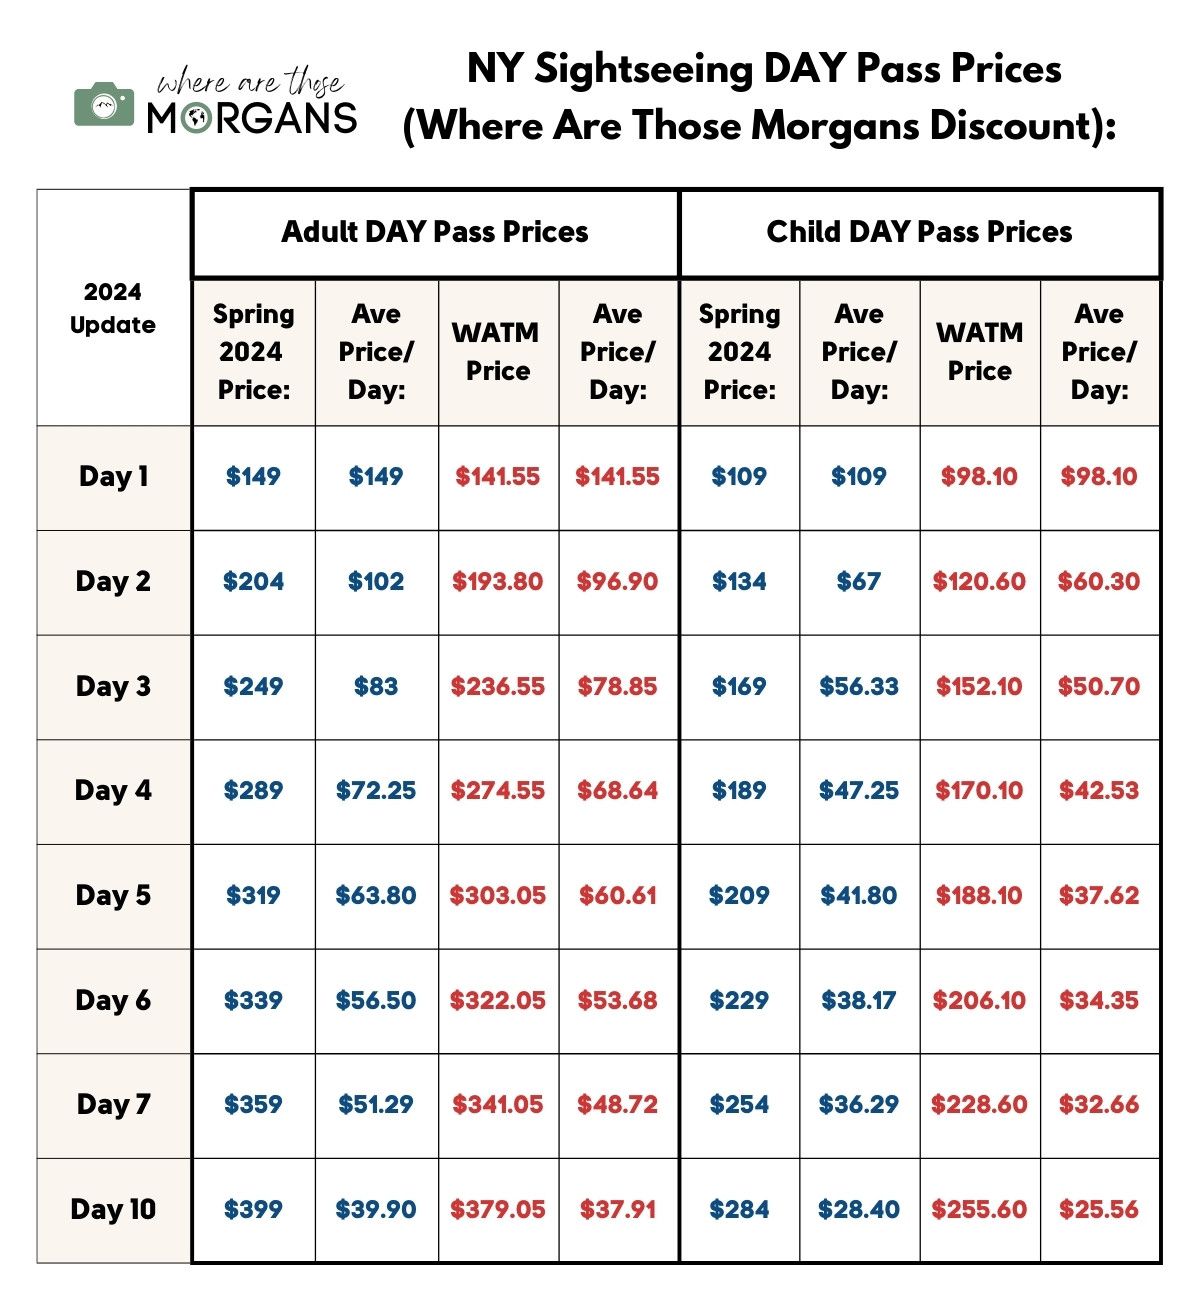 NY Sightseeing day pass price comparison chart with Where Are Those Morgans discount